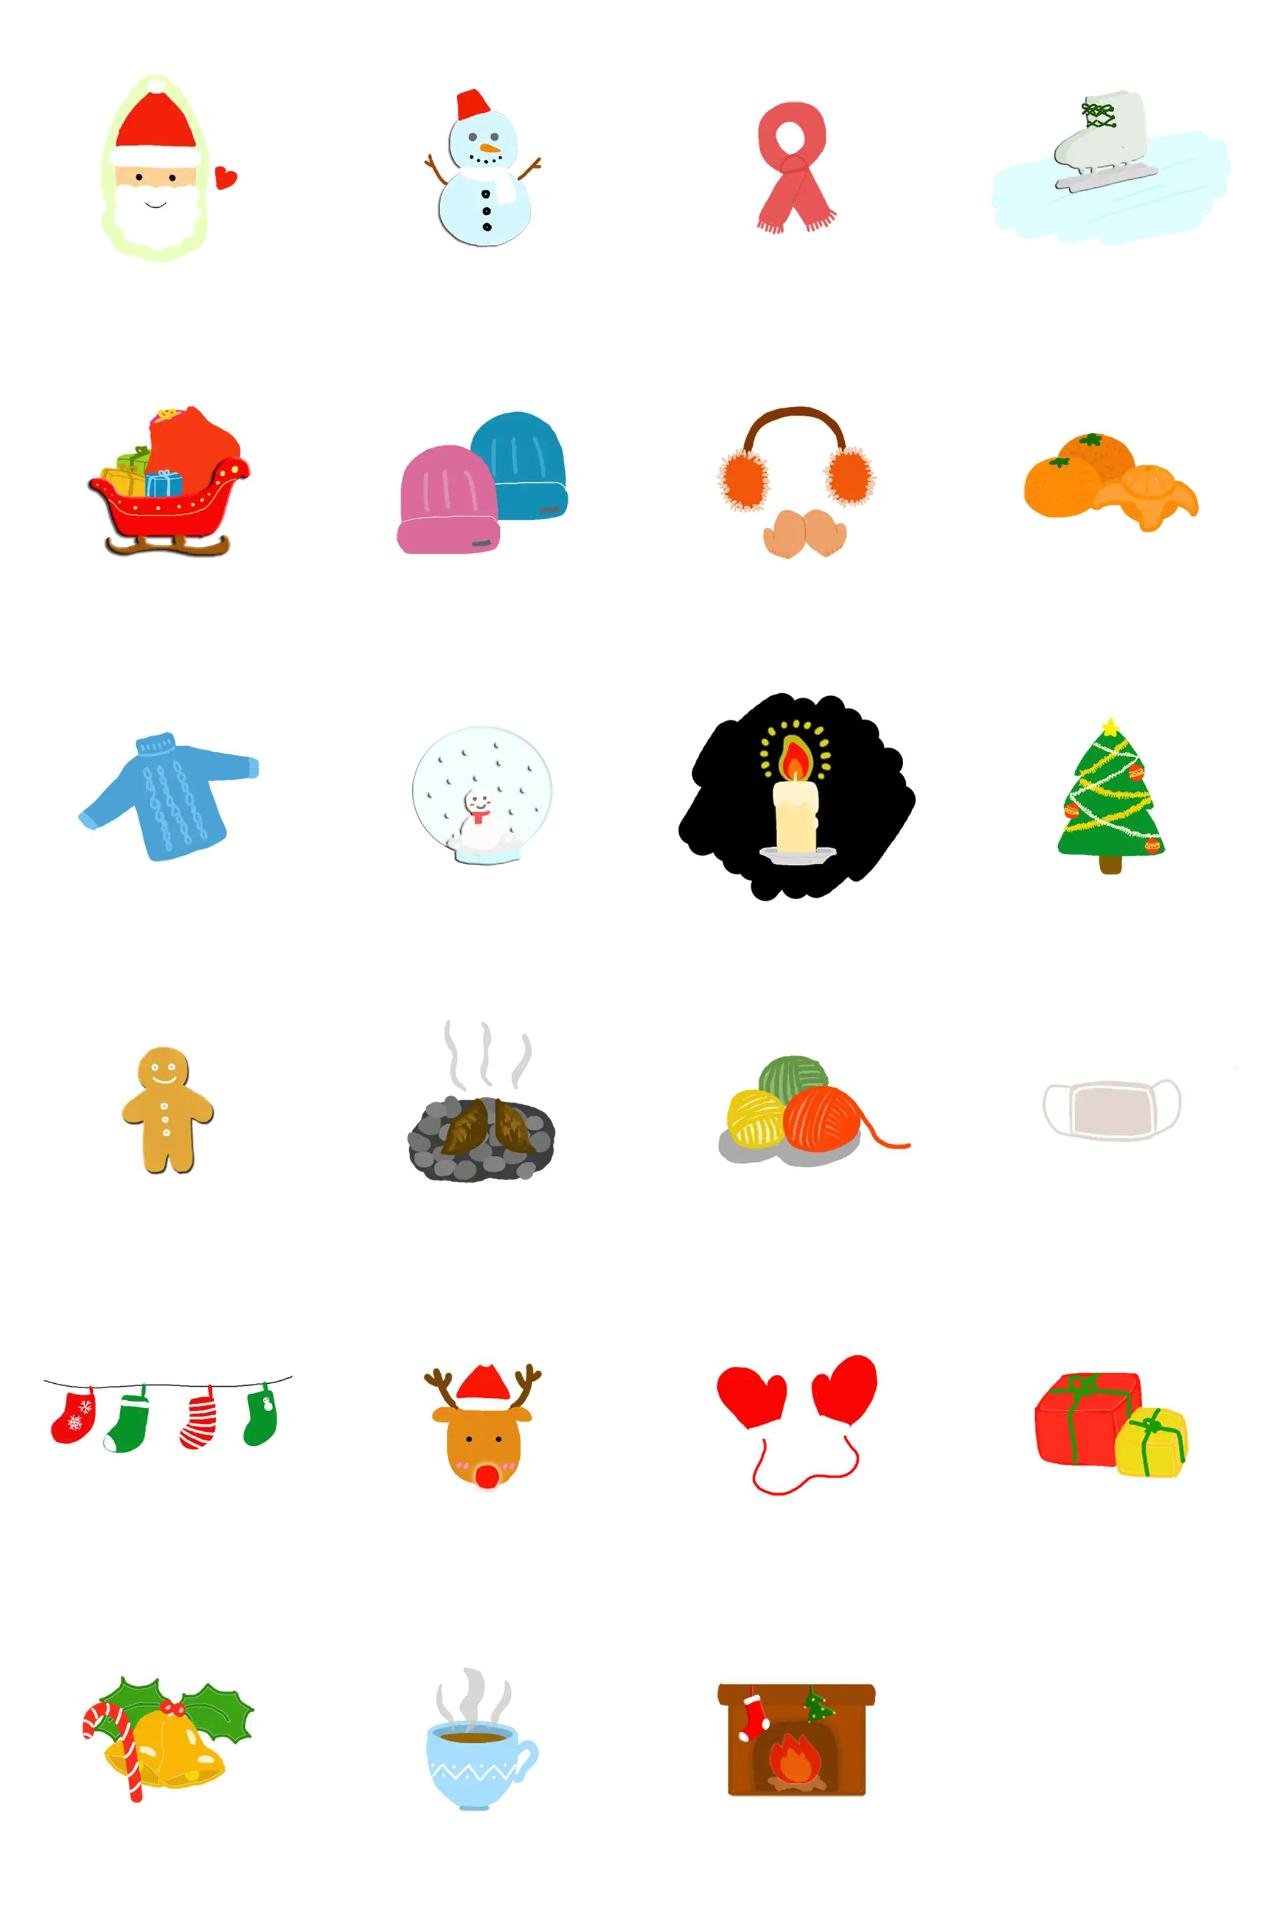 warm winter Romance,Etc. sticker pack for Whatsapp, Telegram, Signal, and others chatting and message apps